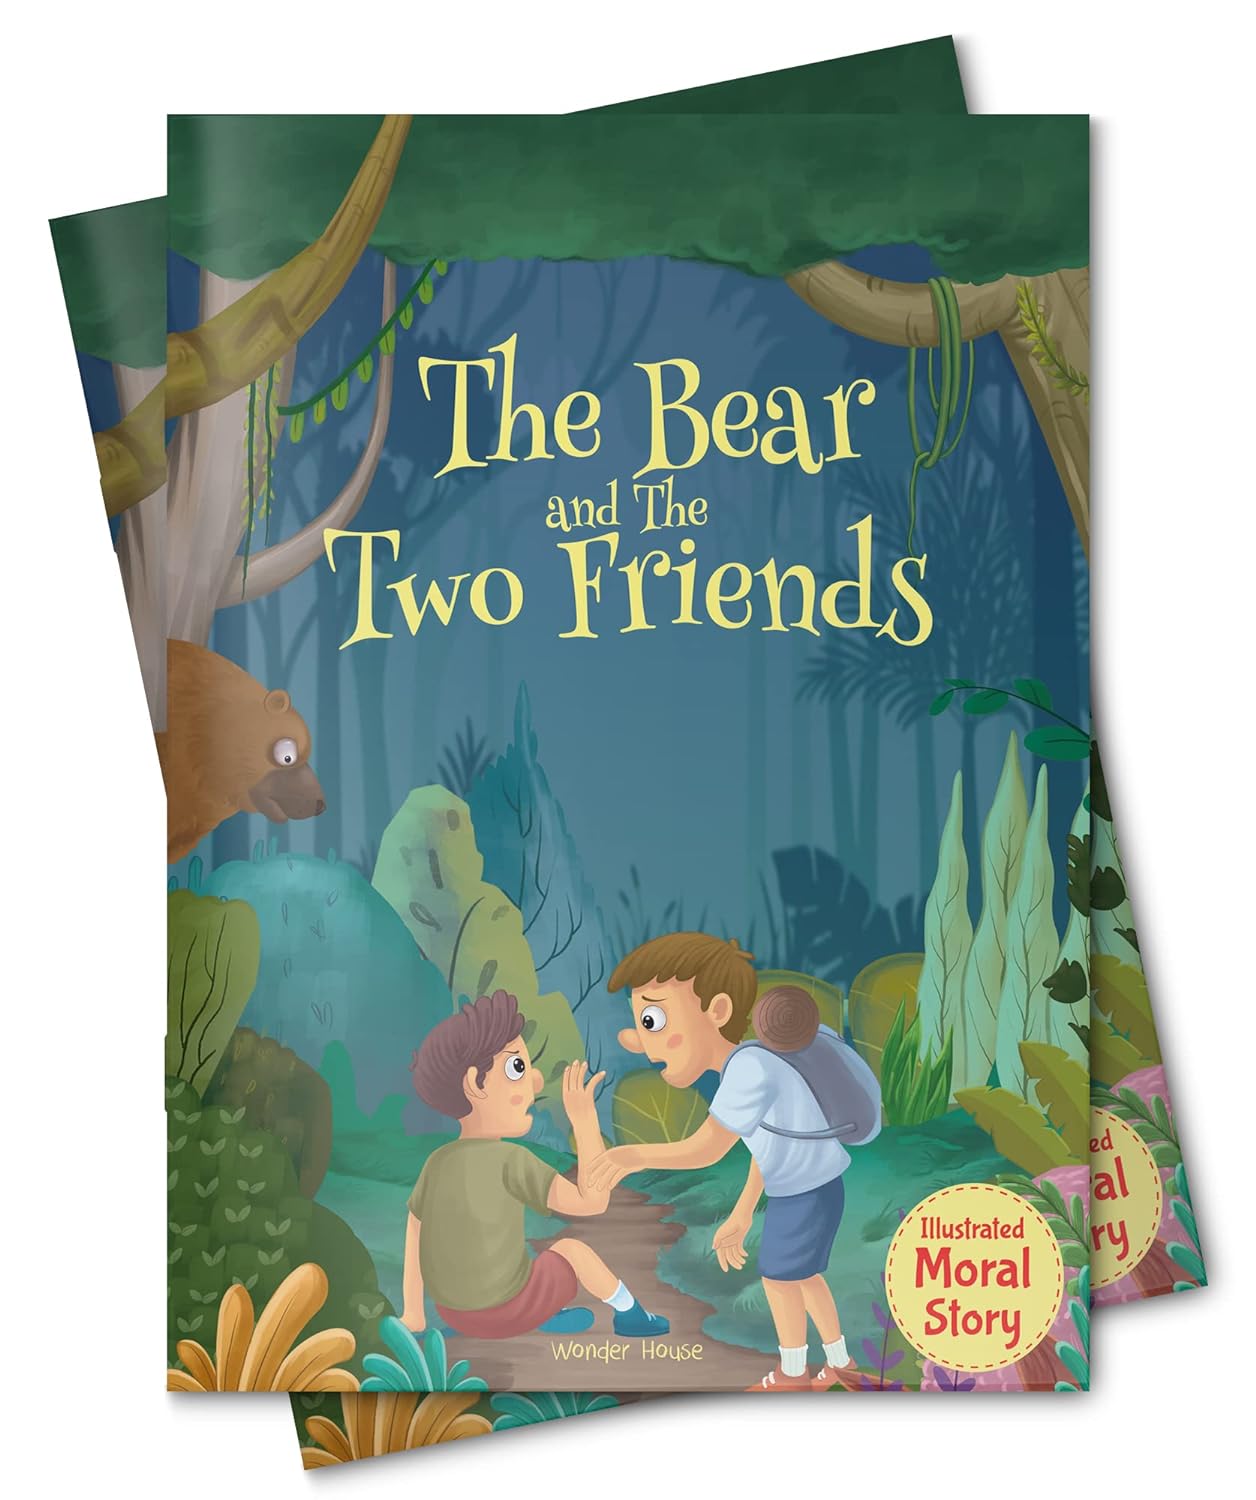 The Bear and the Two Friends - Illustrated Moral Story for Children